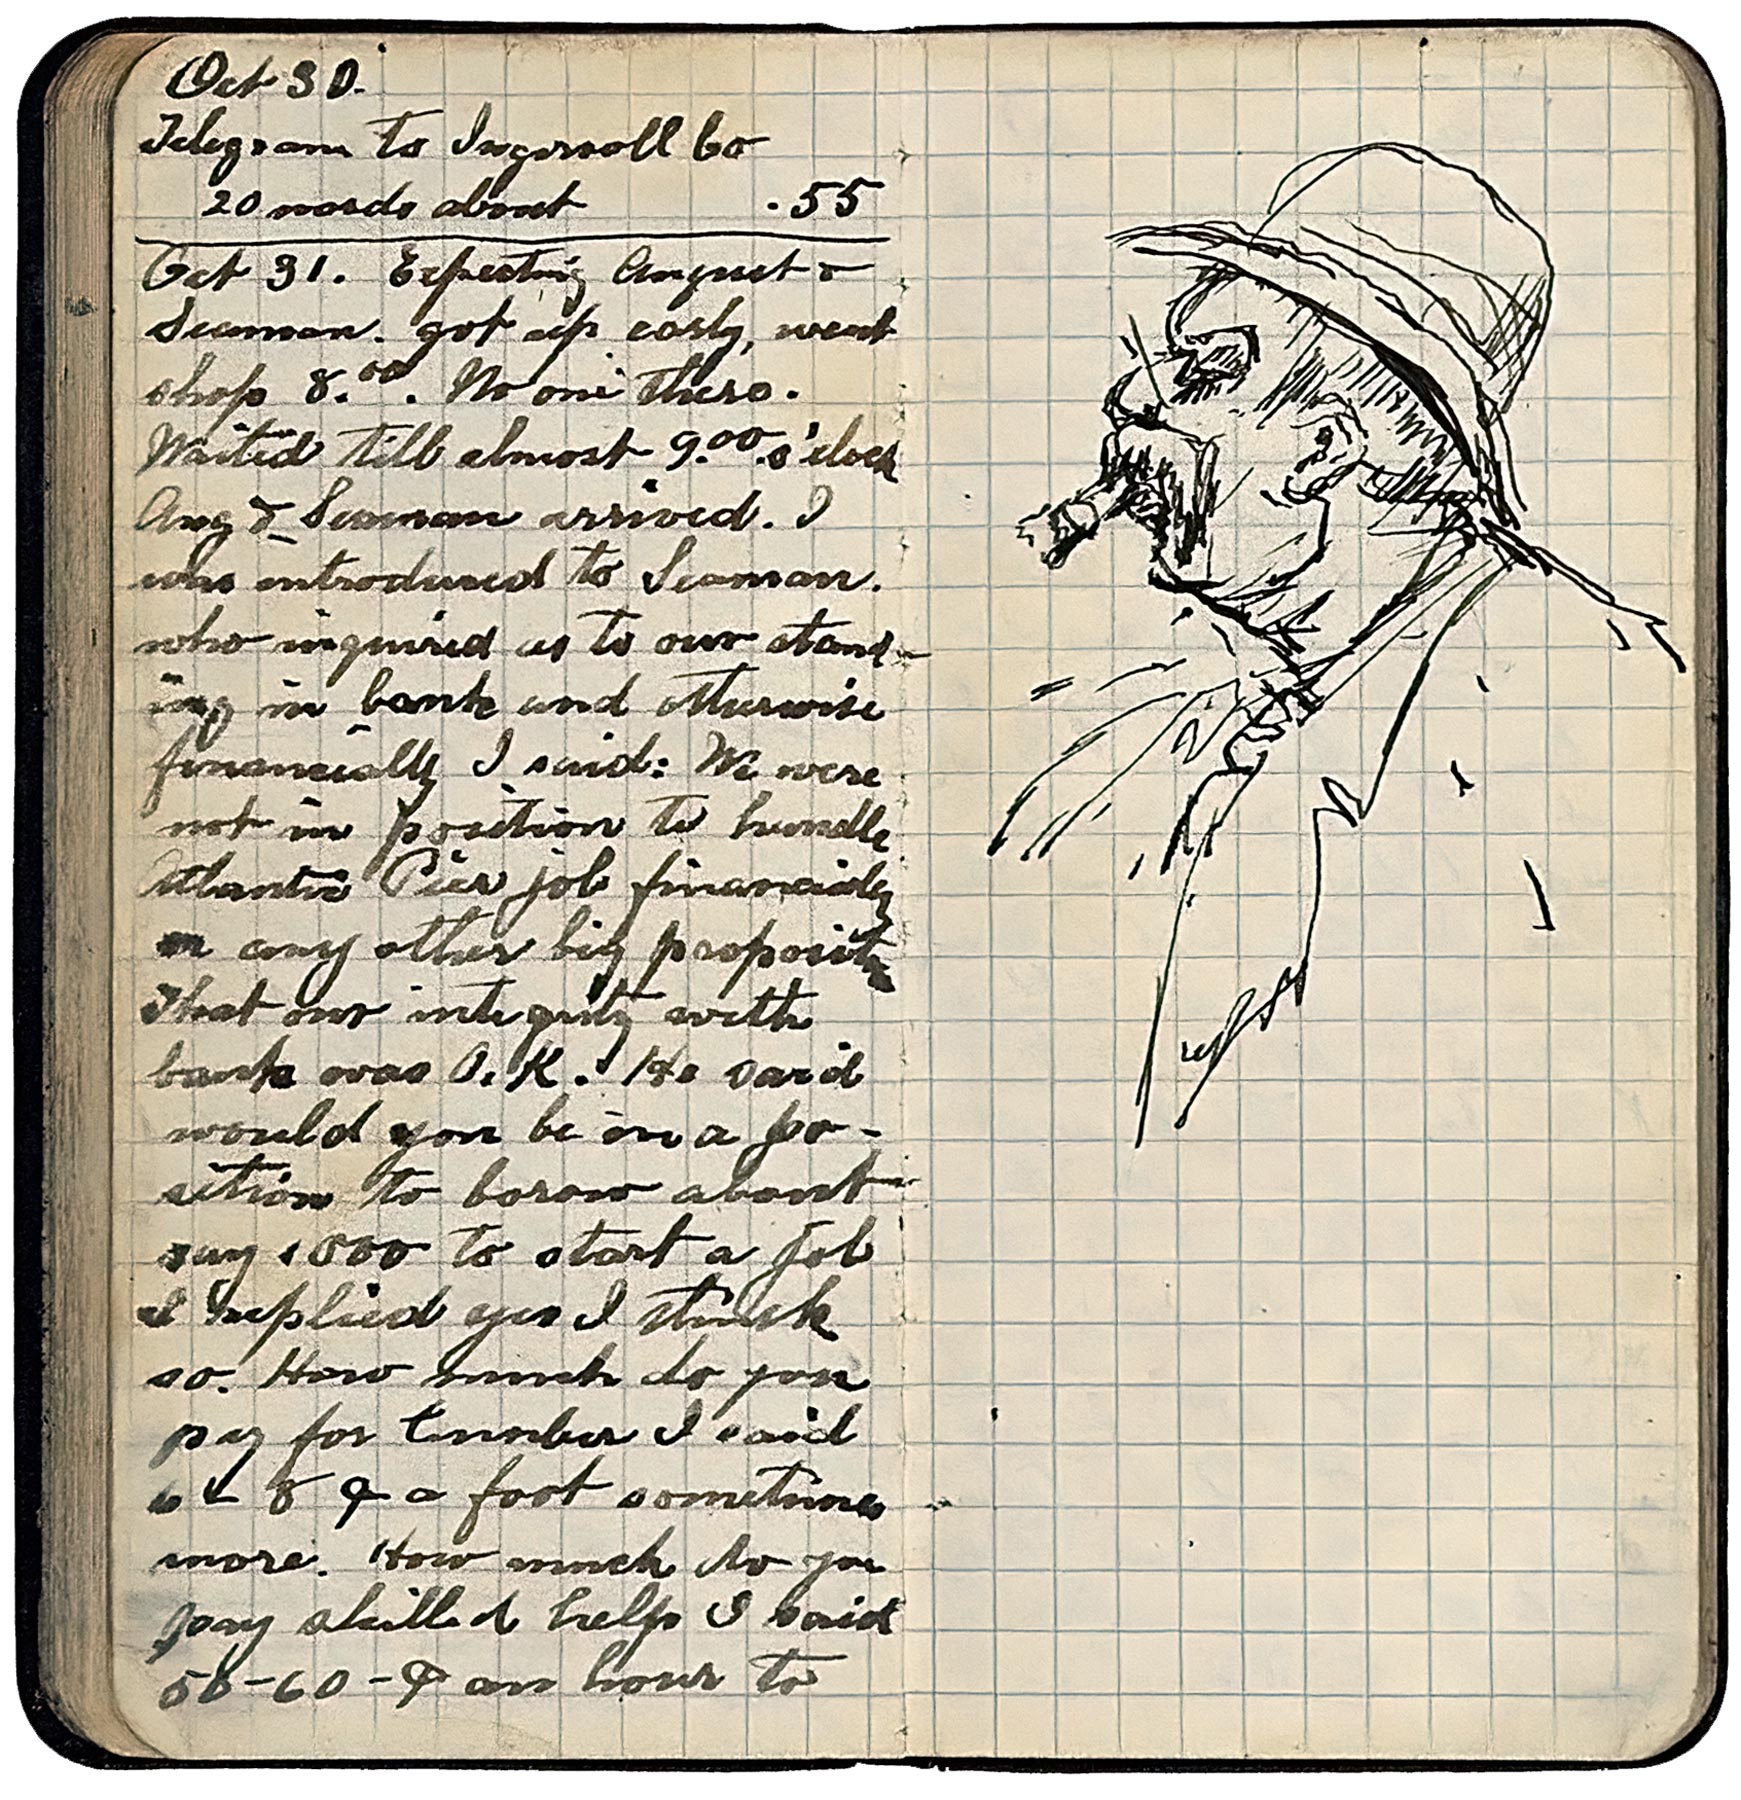 Pages from Müller’s logbook, 1909.